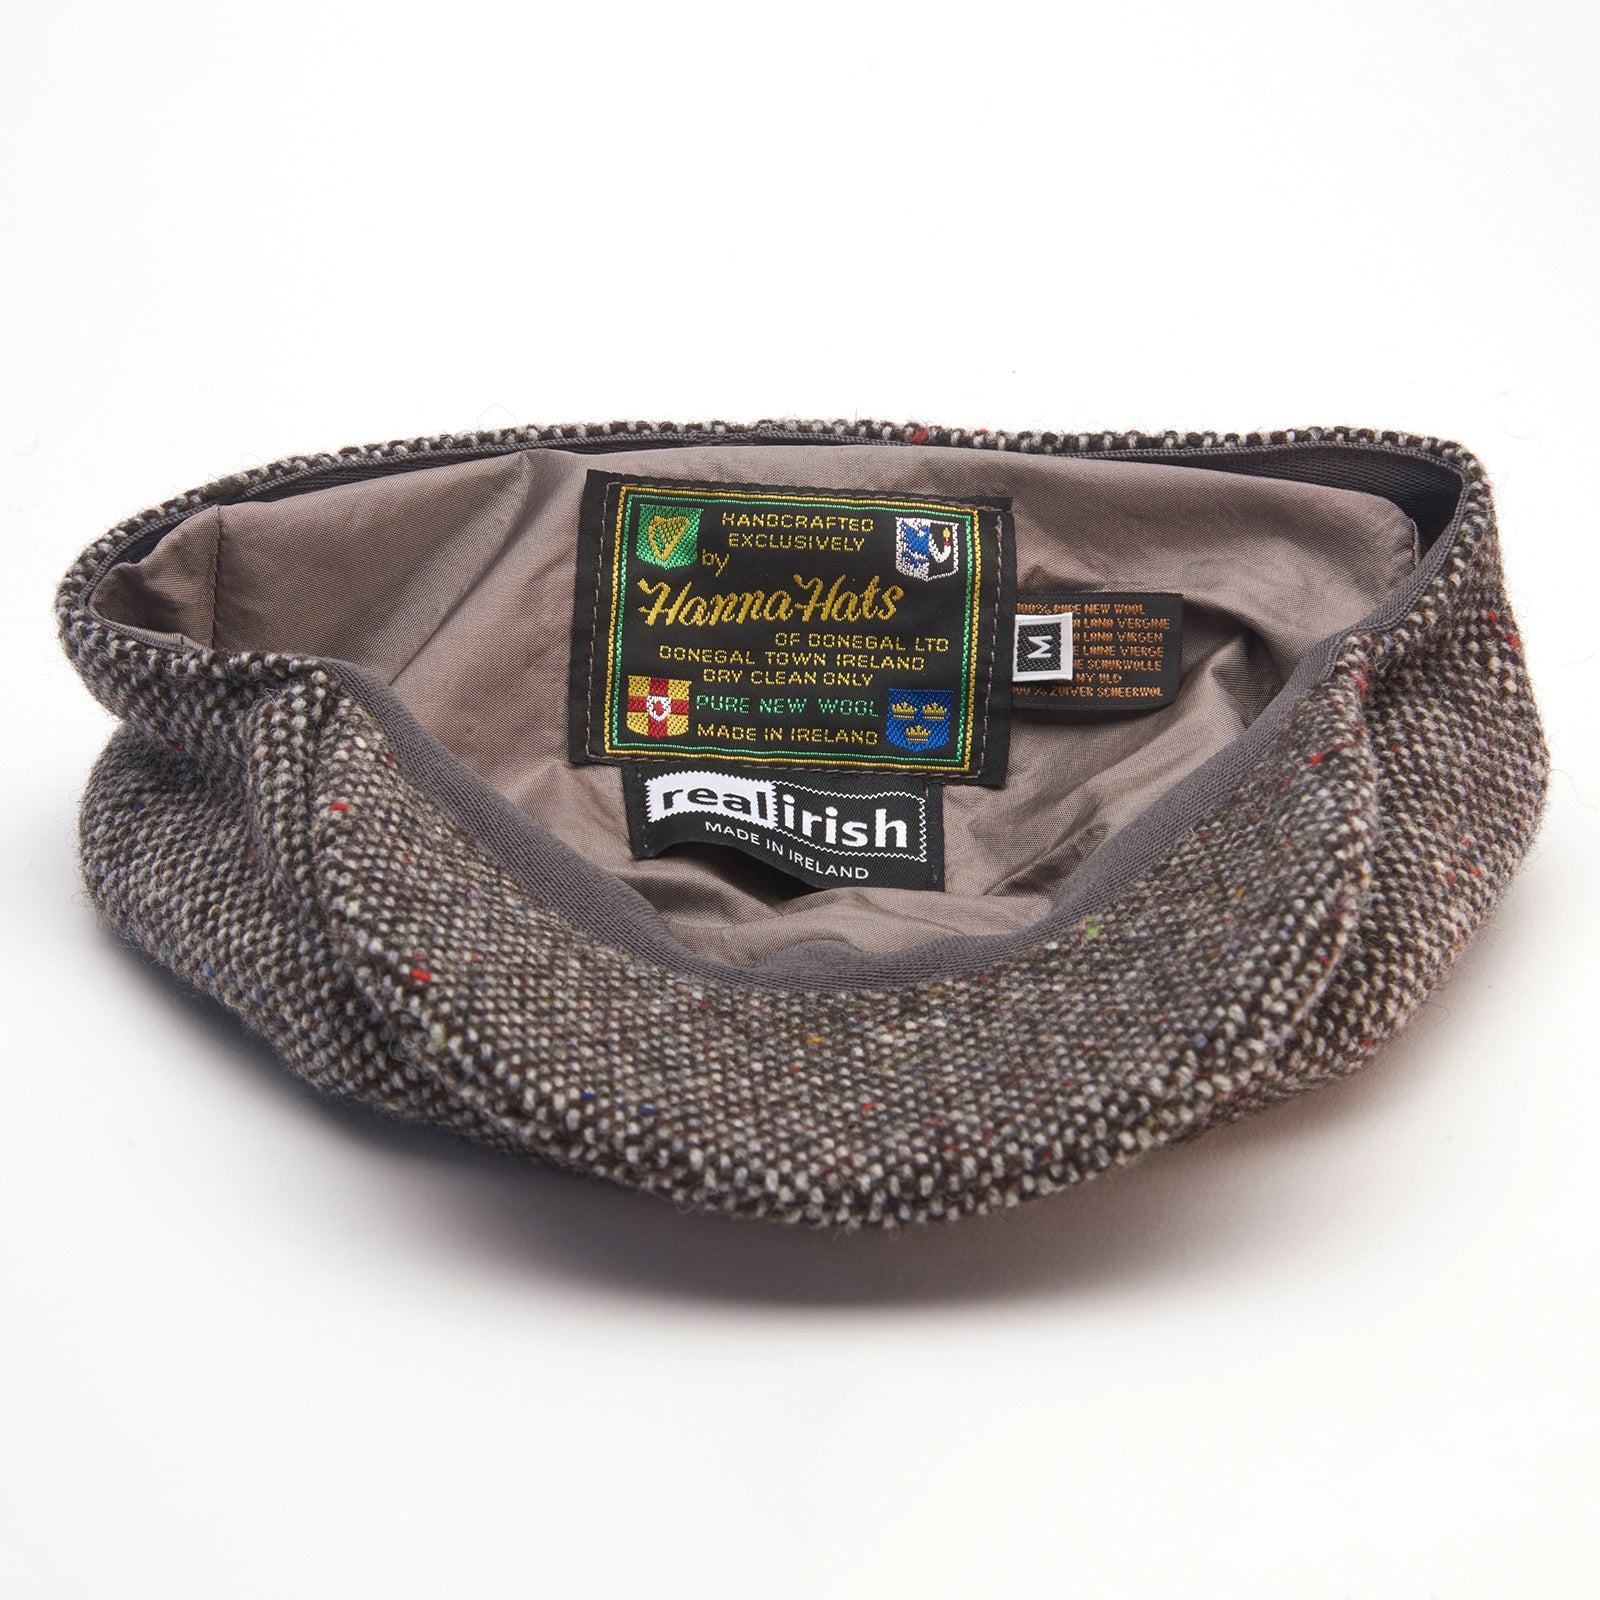 Inside view of Grey Donegal Tweed Peaky Blinders Style Cap by Hanna Hats of Donegal.